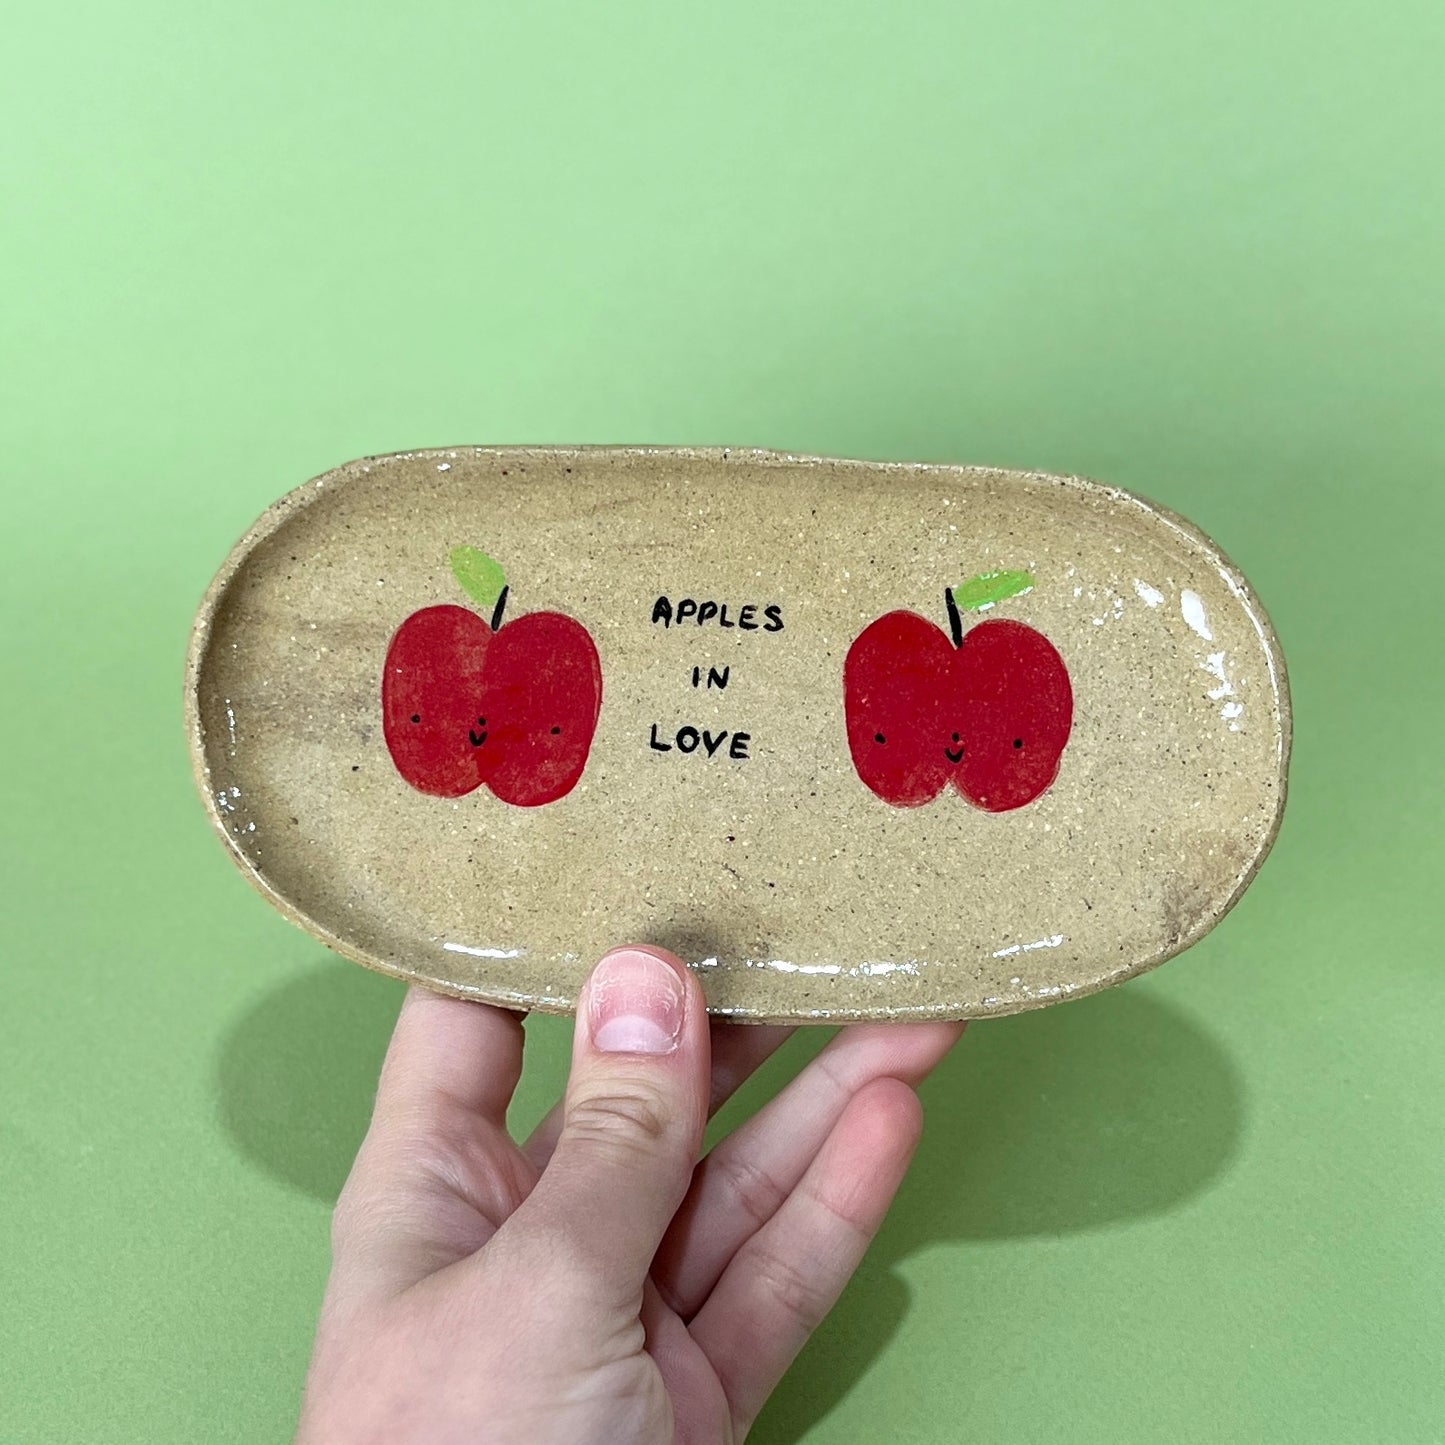 "Apples in Love" Tray